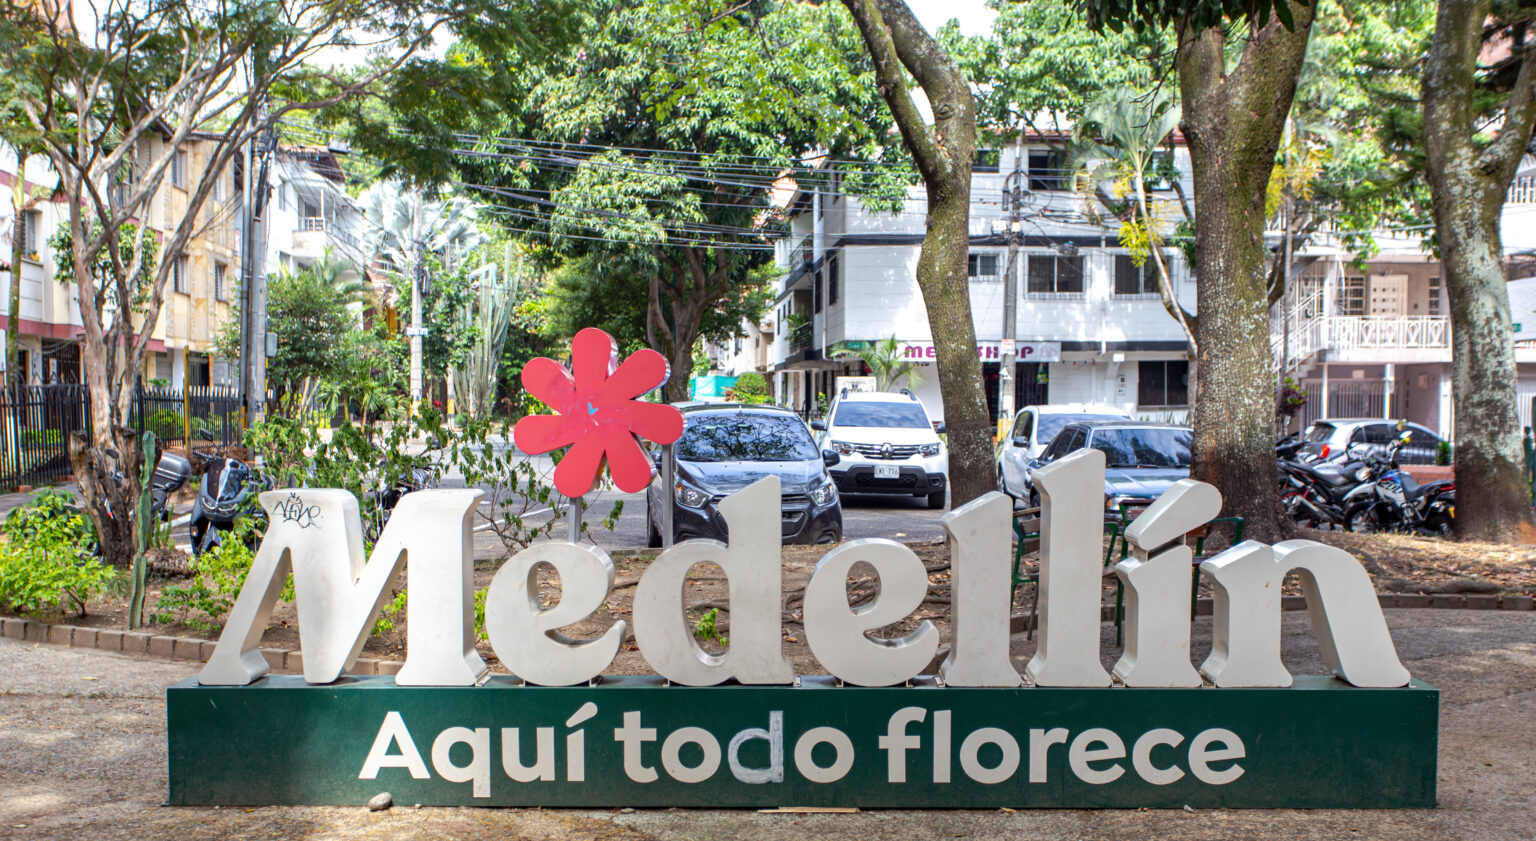 Medellín to Host Colombia VC Week, One of Latin America's Most Important Venture Capital Events